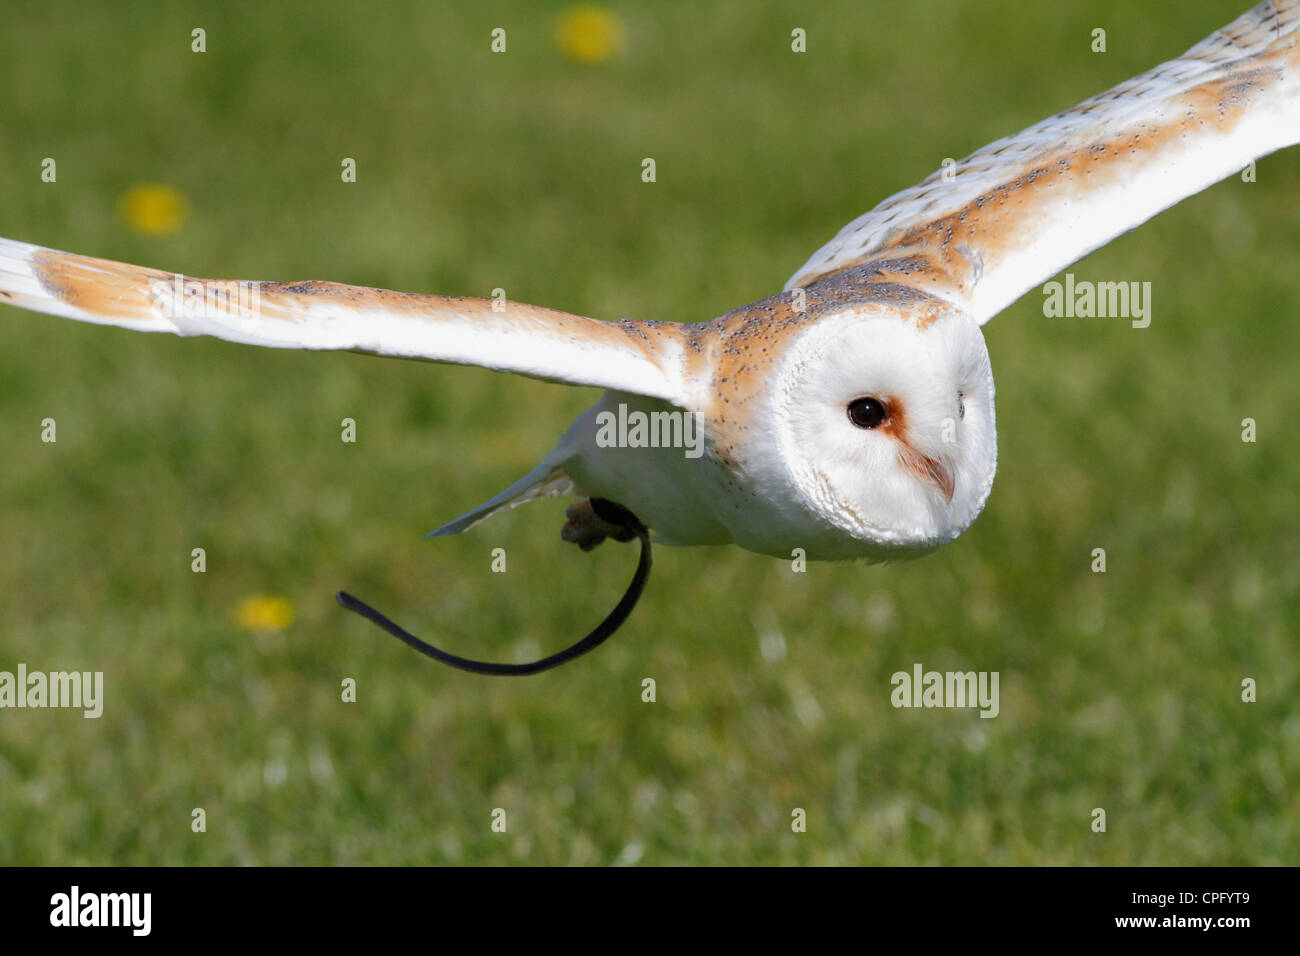 Barn Owl flying in captivity at a display Stock Photo